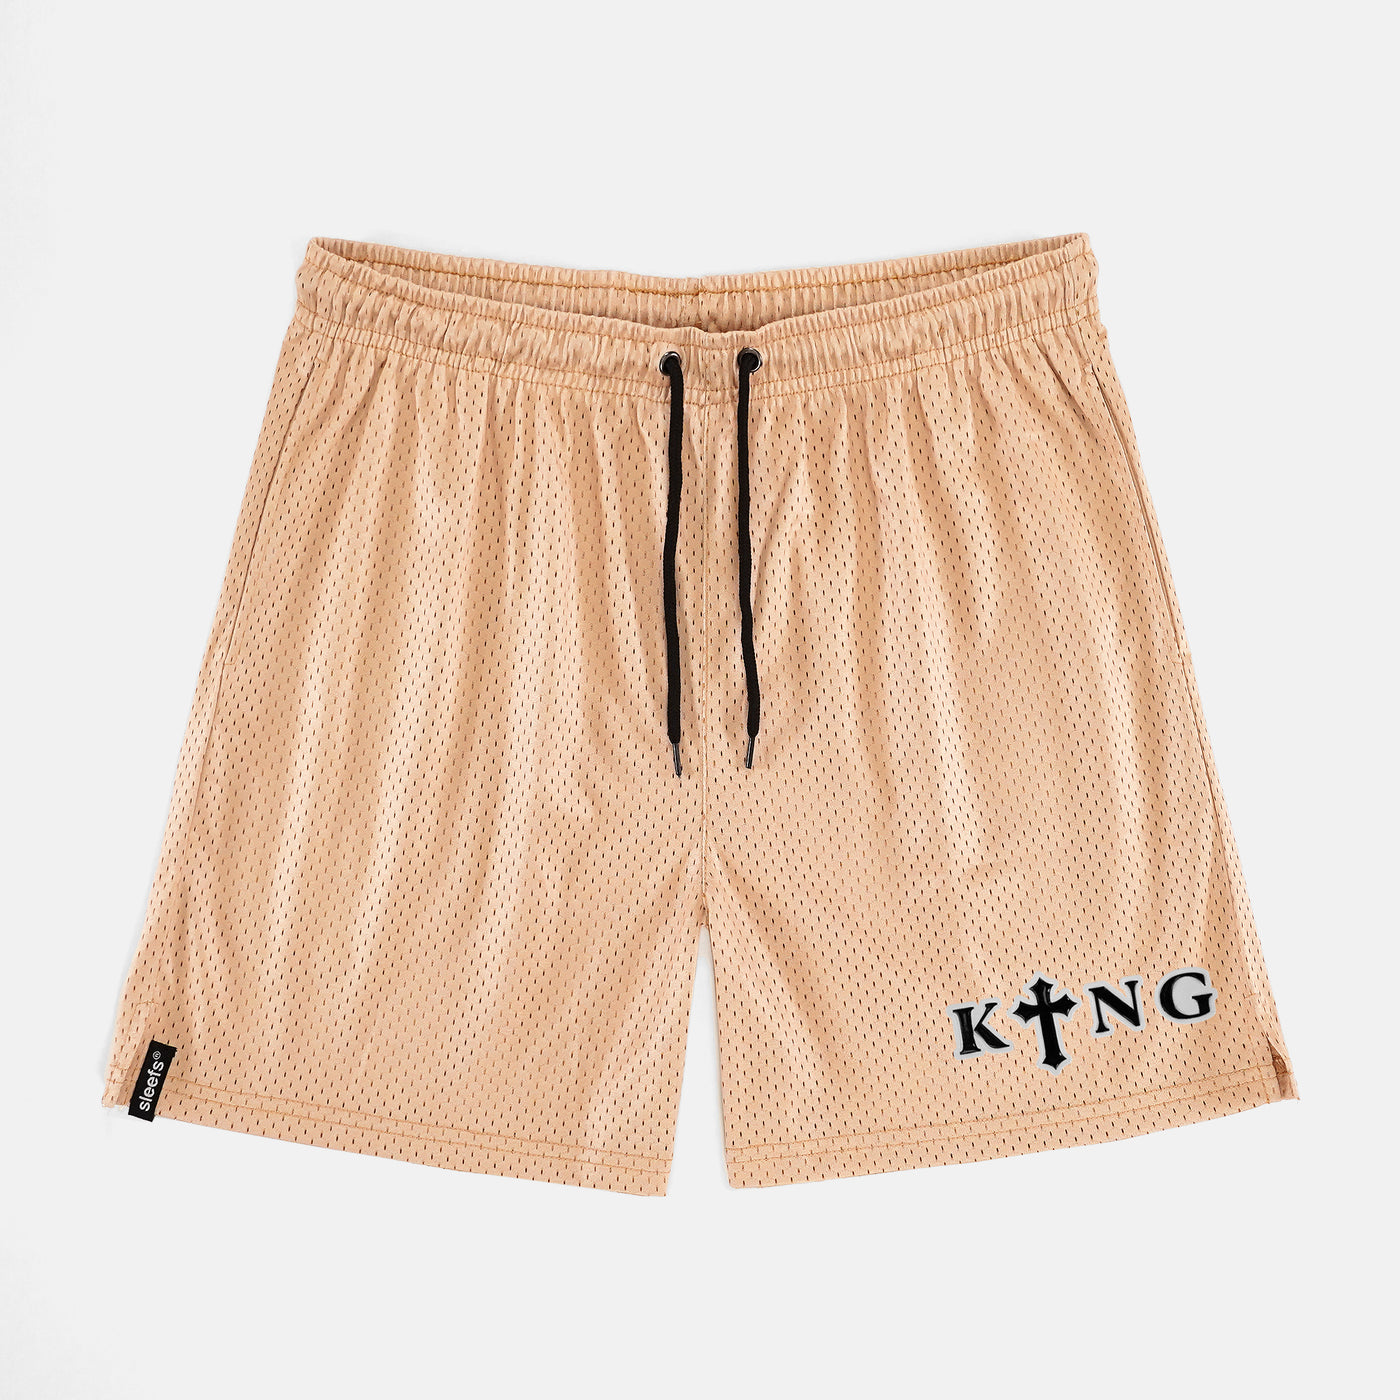 King Gothic Cross Patch Shorts - 7"